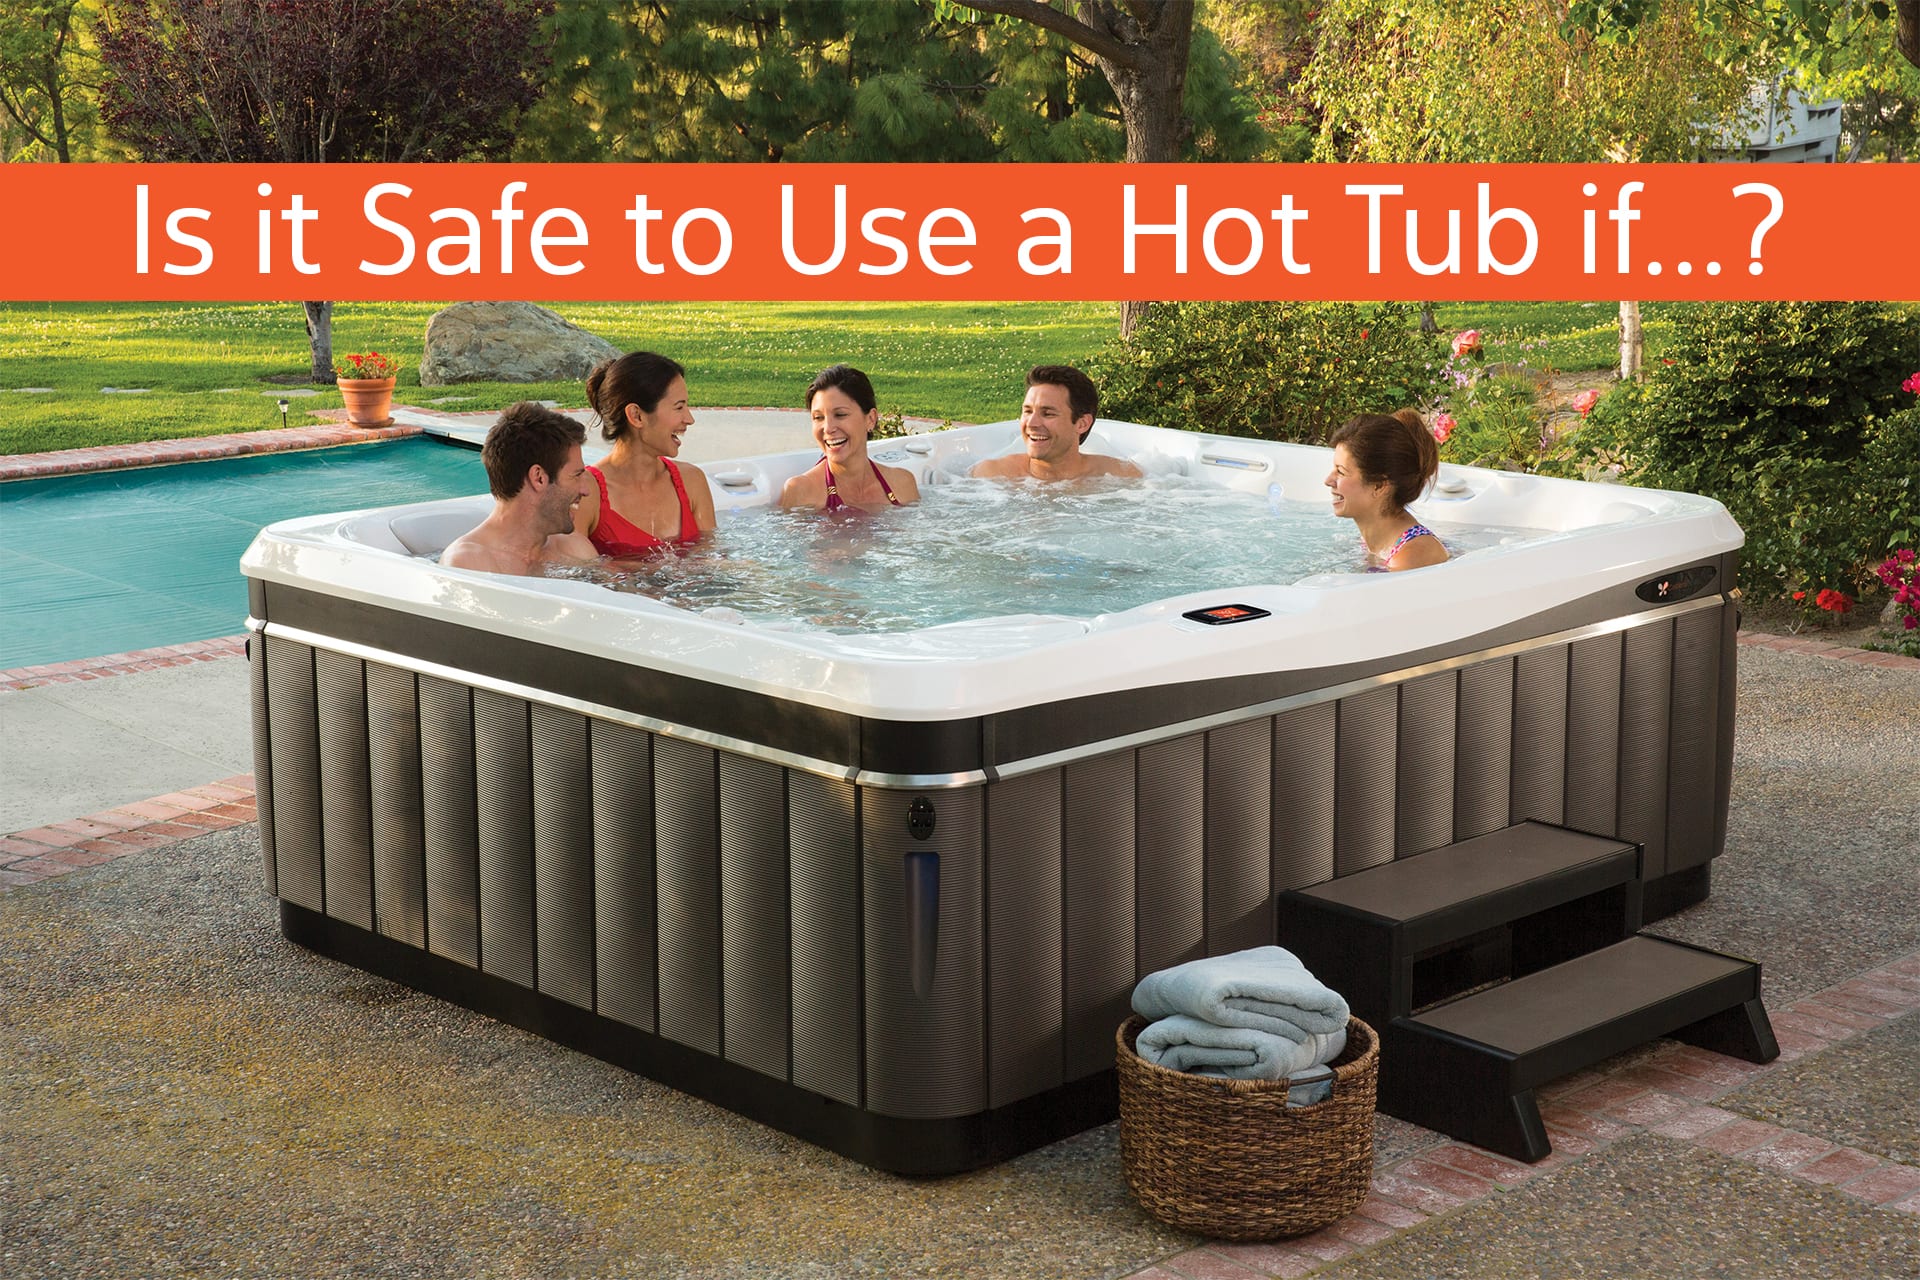 Is it Safe to Use a Hot Tub if…?